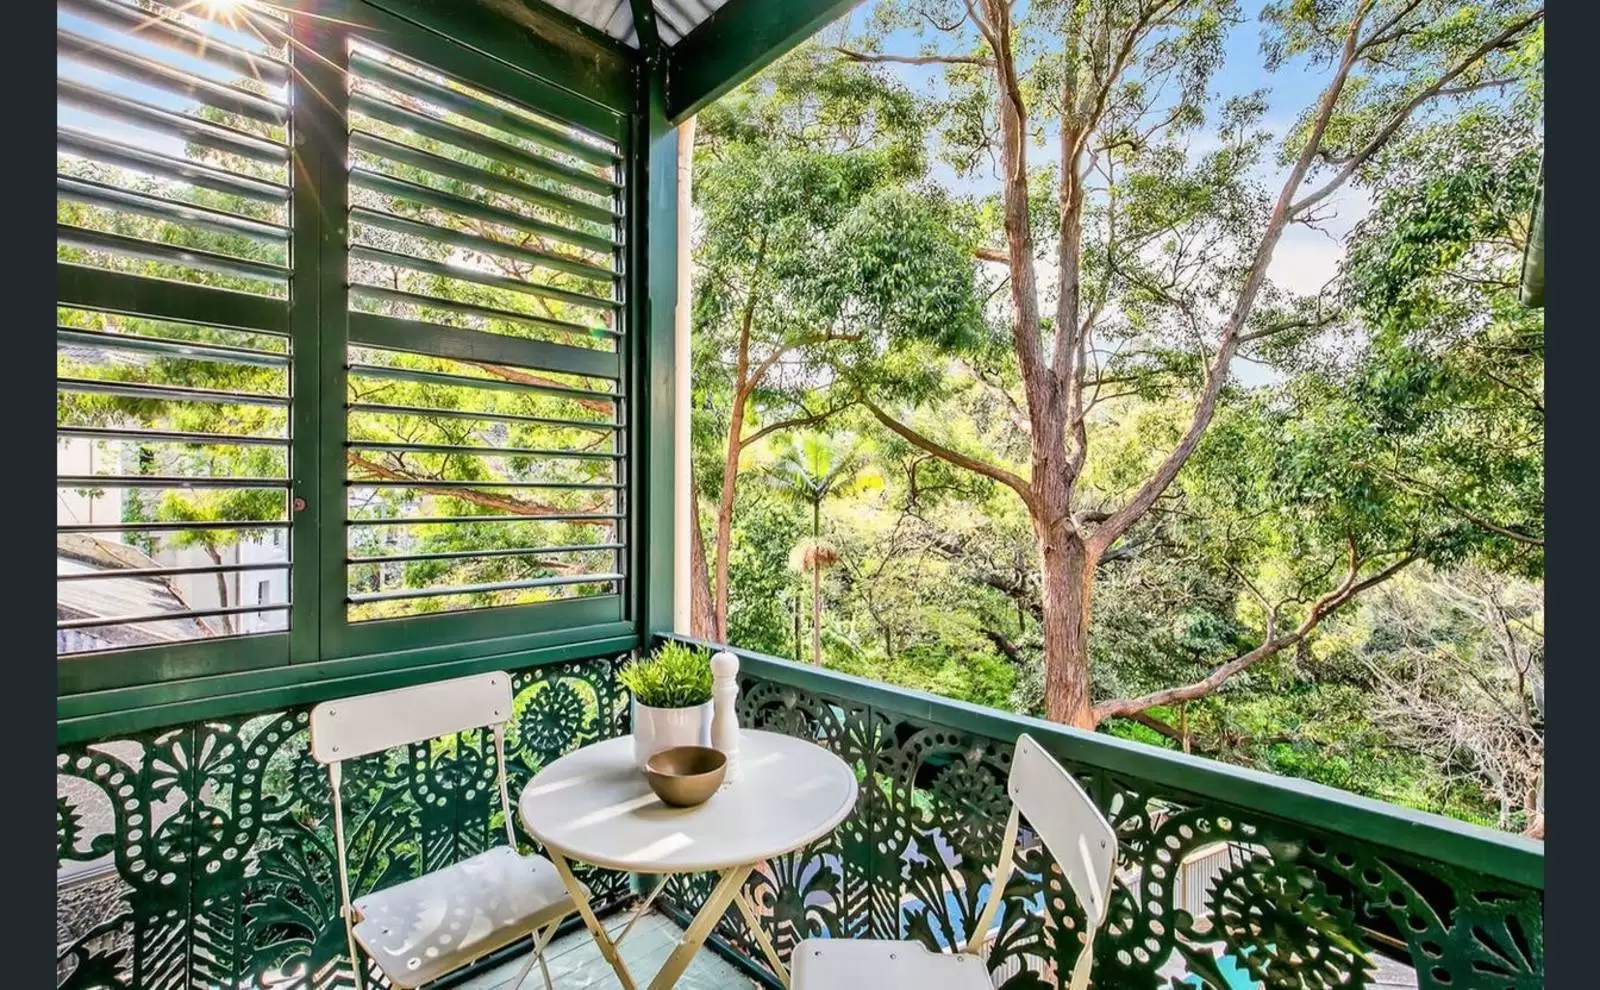 Photo #7: 1/74 Wallaroy Road, Woollahra - For Lease by Sydney Sotheby's International Realty